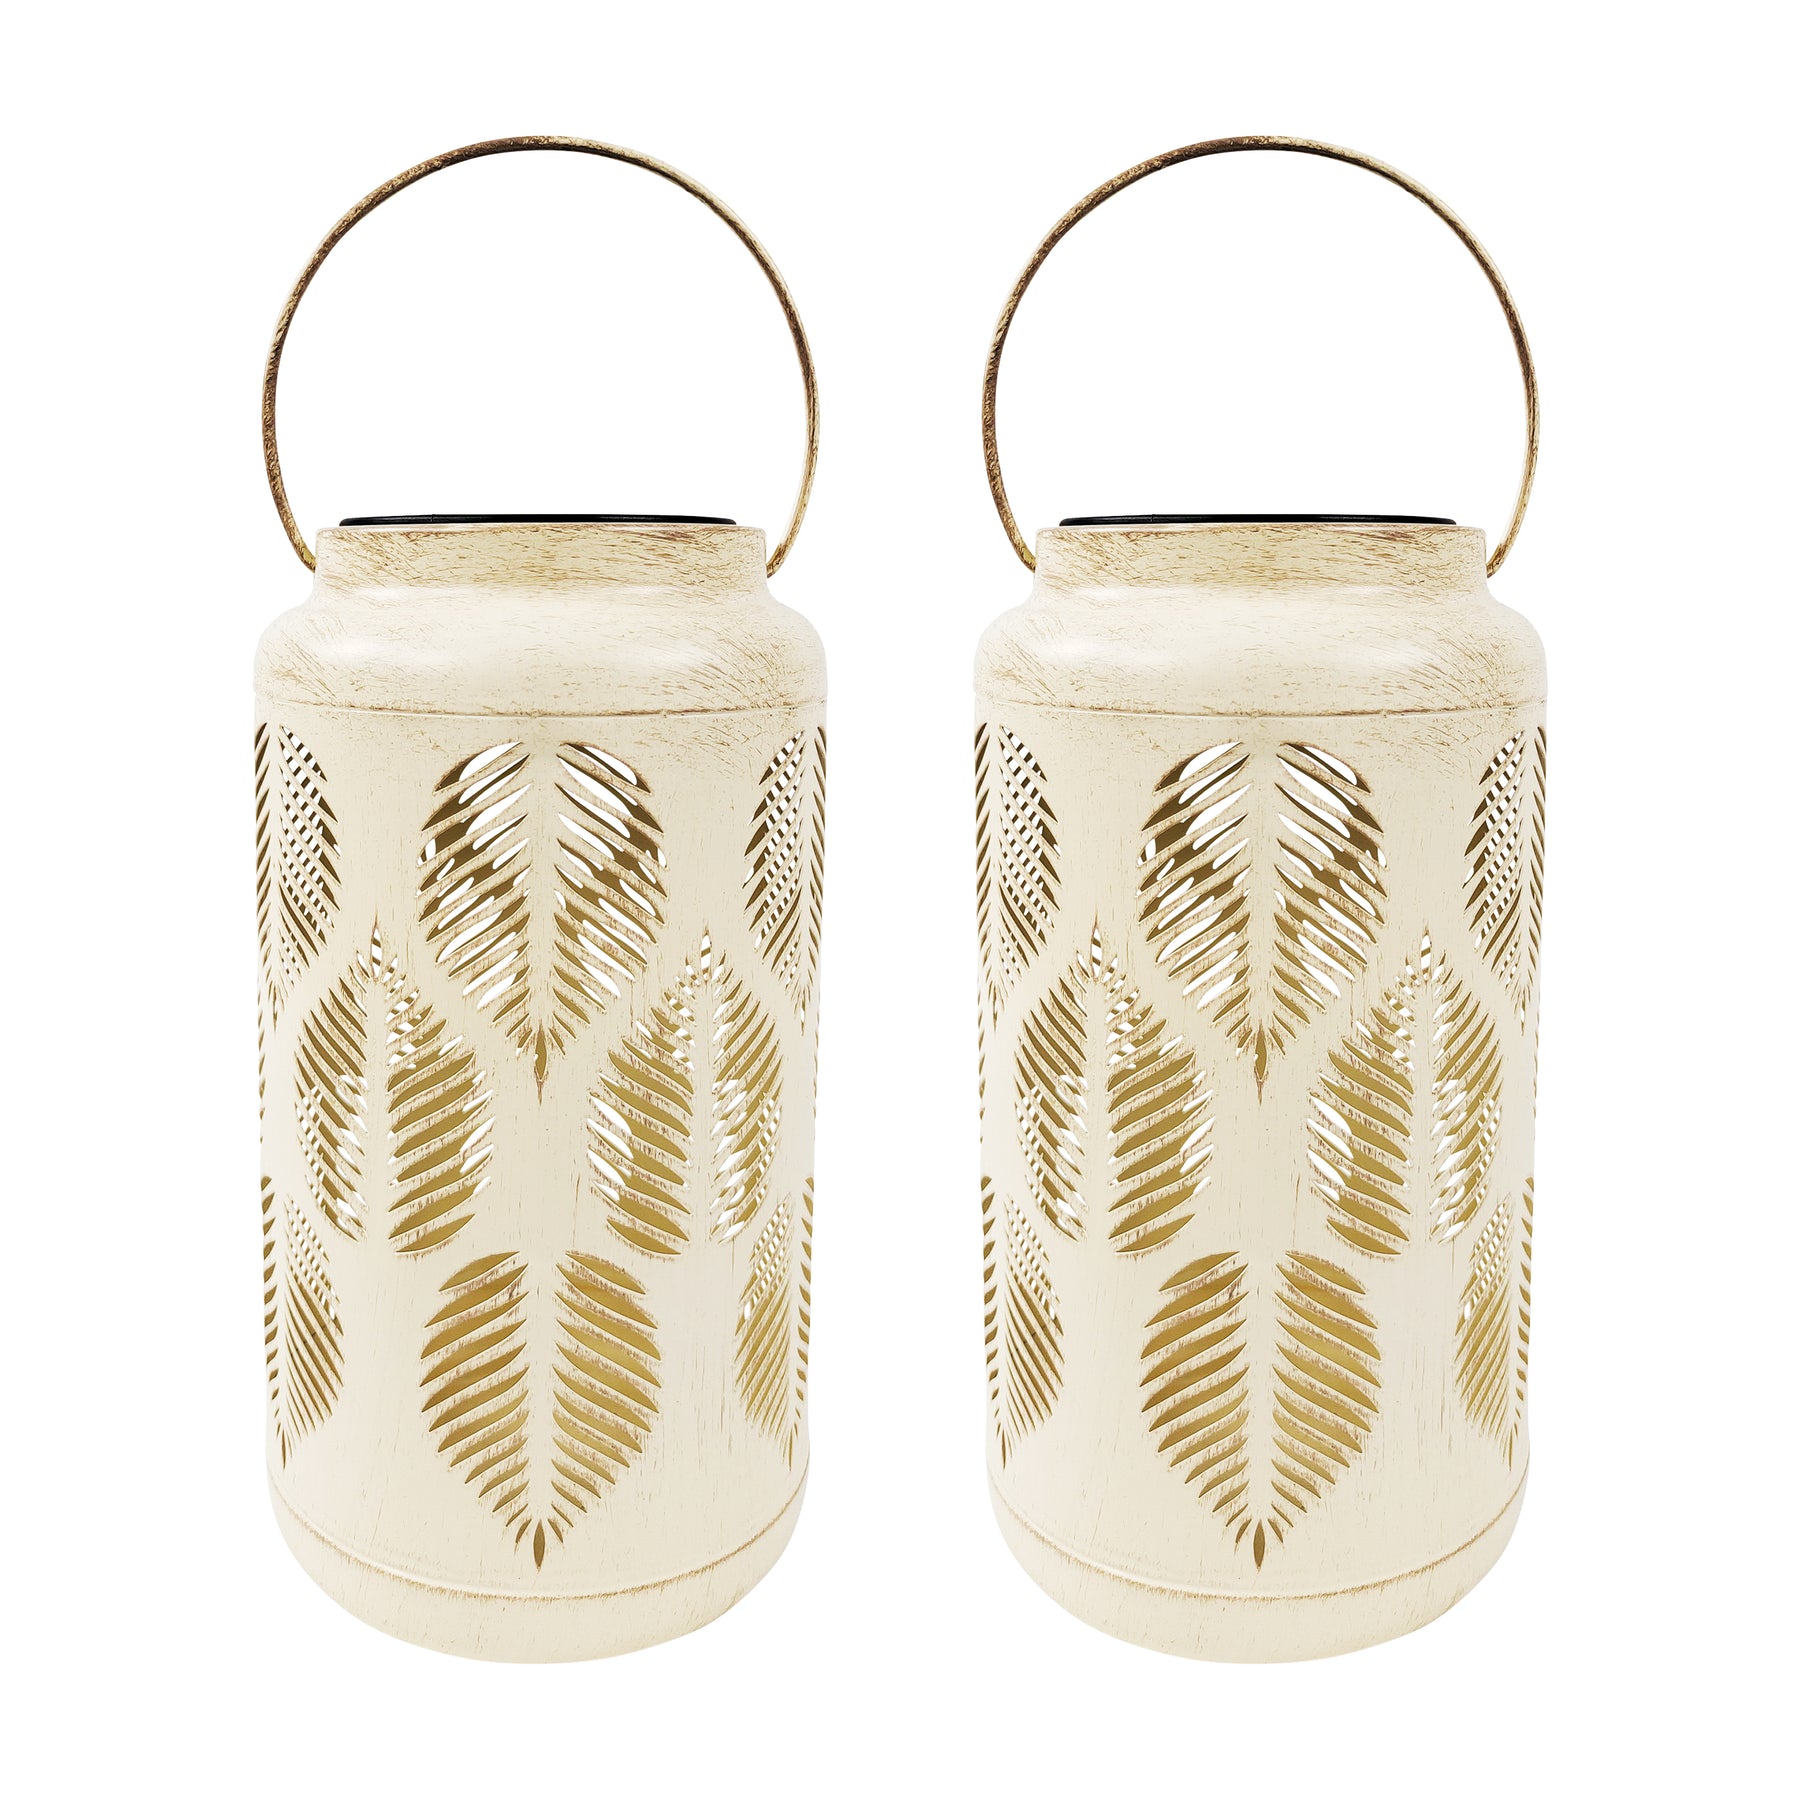 Bliss Outdoors 9-inch Tall 2-Pack Hanging and Tabletop Decorative Solar LED Lantern with Unique Tropical Leaf Design and Antique Hand Painted Finish in the antique white variation.